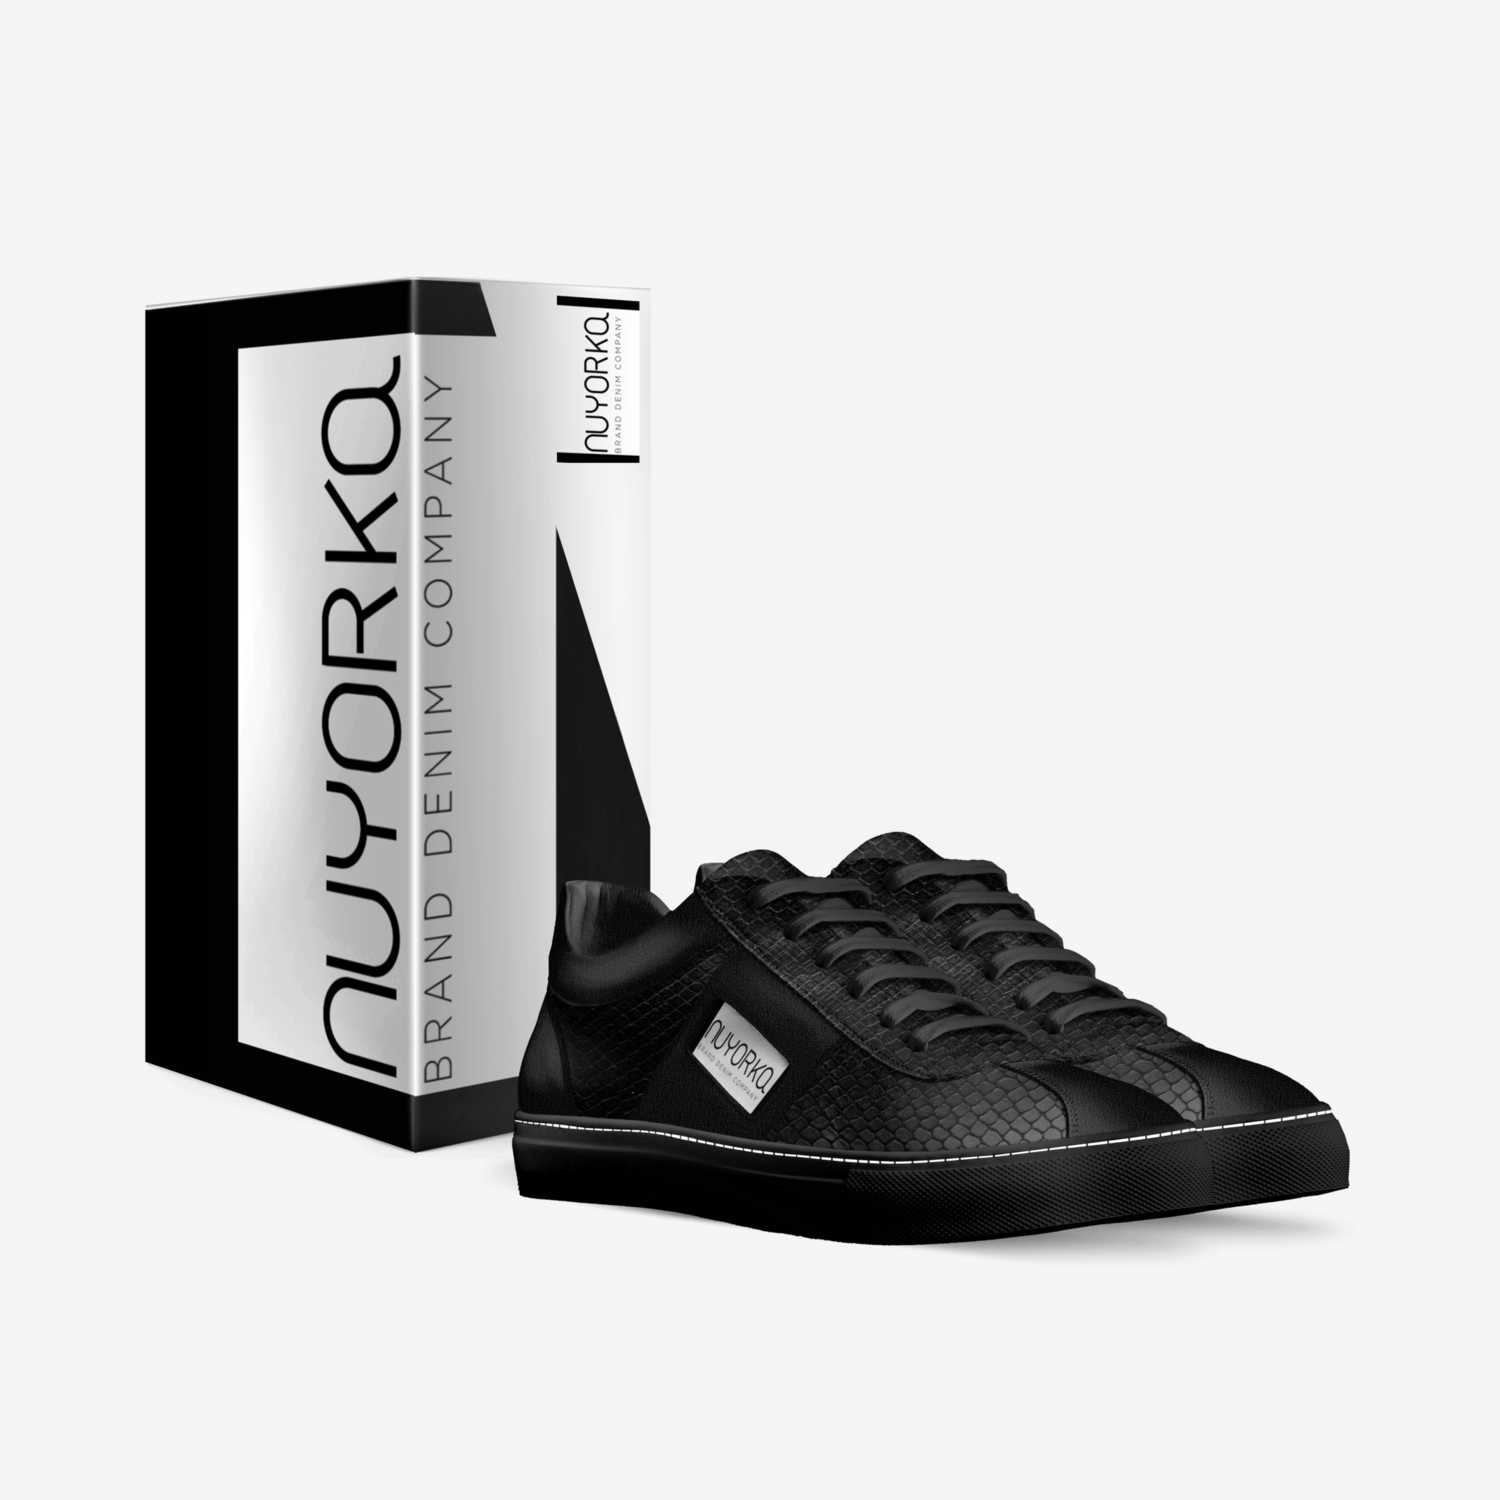 nuyorka custom made in Italy shoes by Ain El | Box view